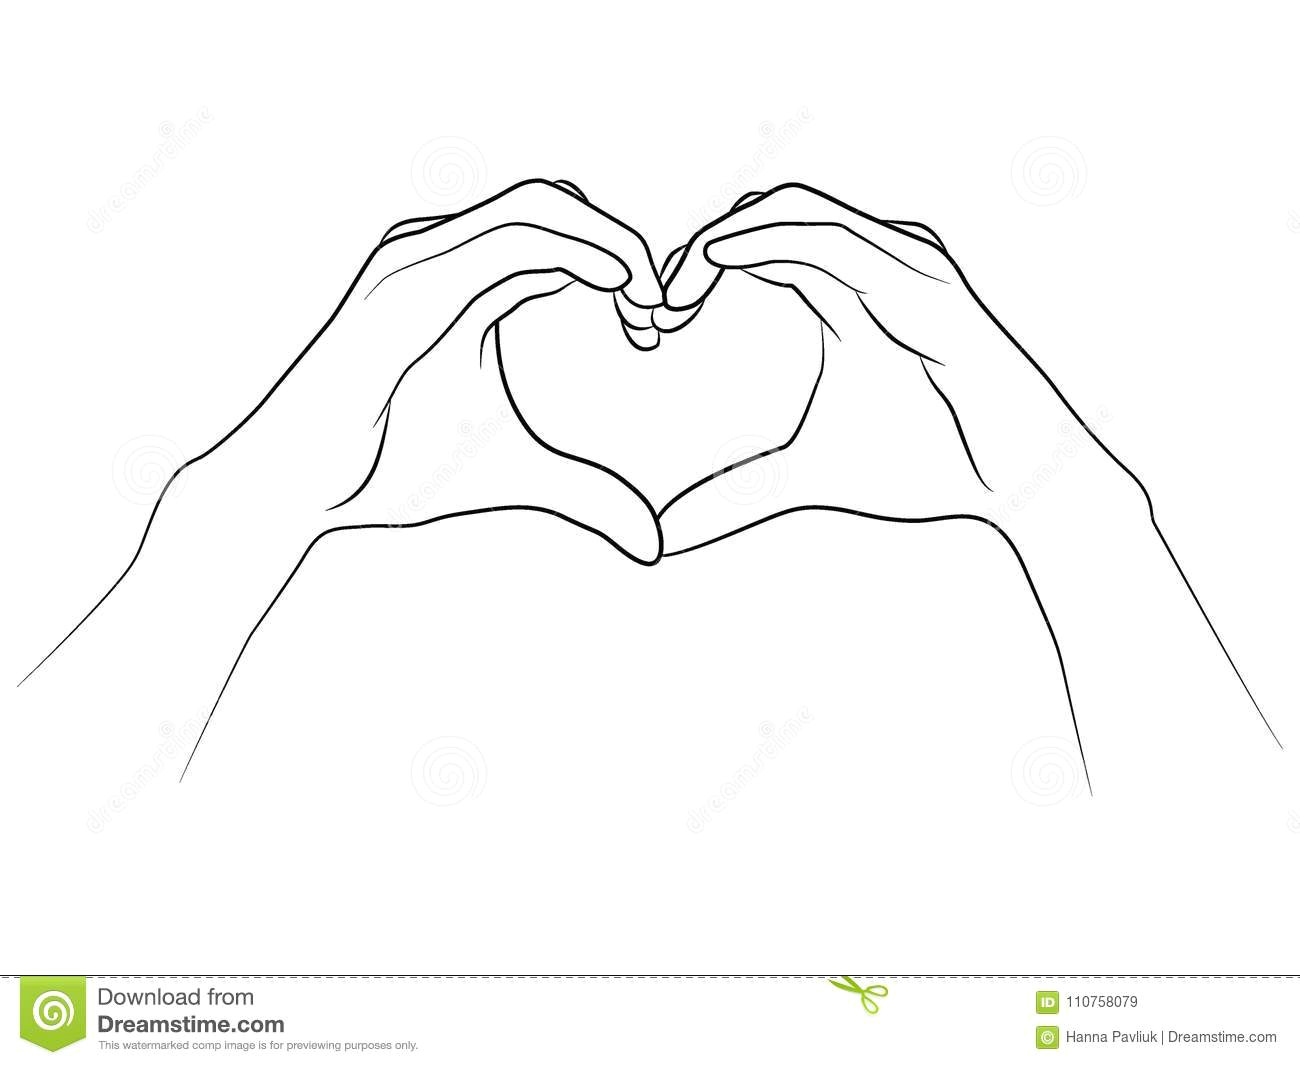 Drawing Hands Using Shapes Hands Folded together In the Shape Of A Heart Stock Vector